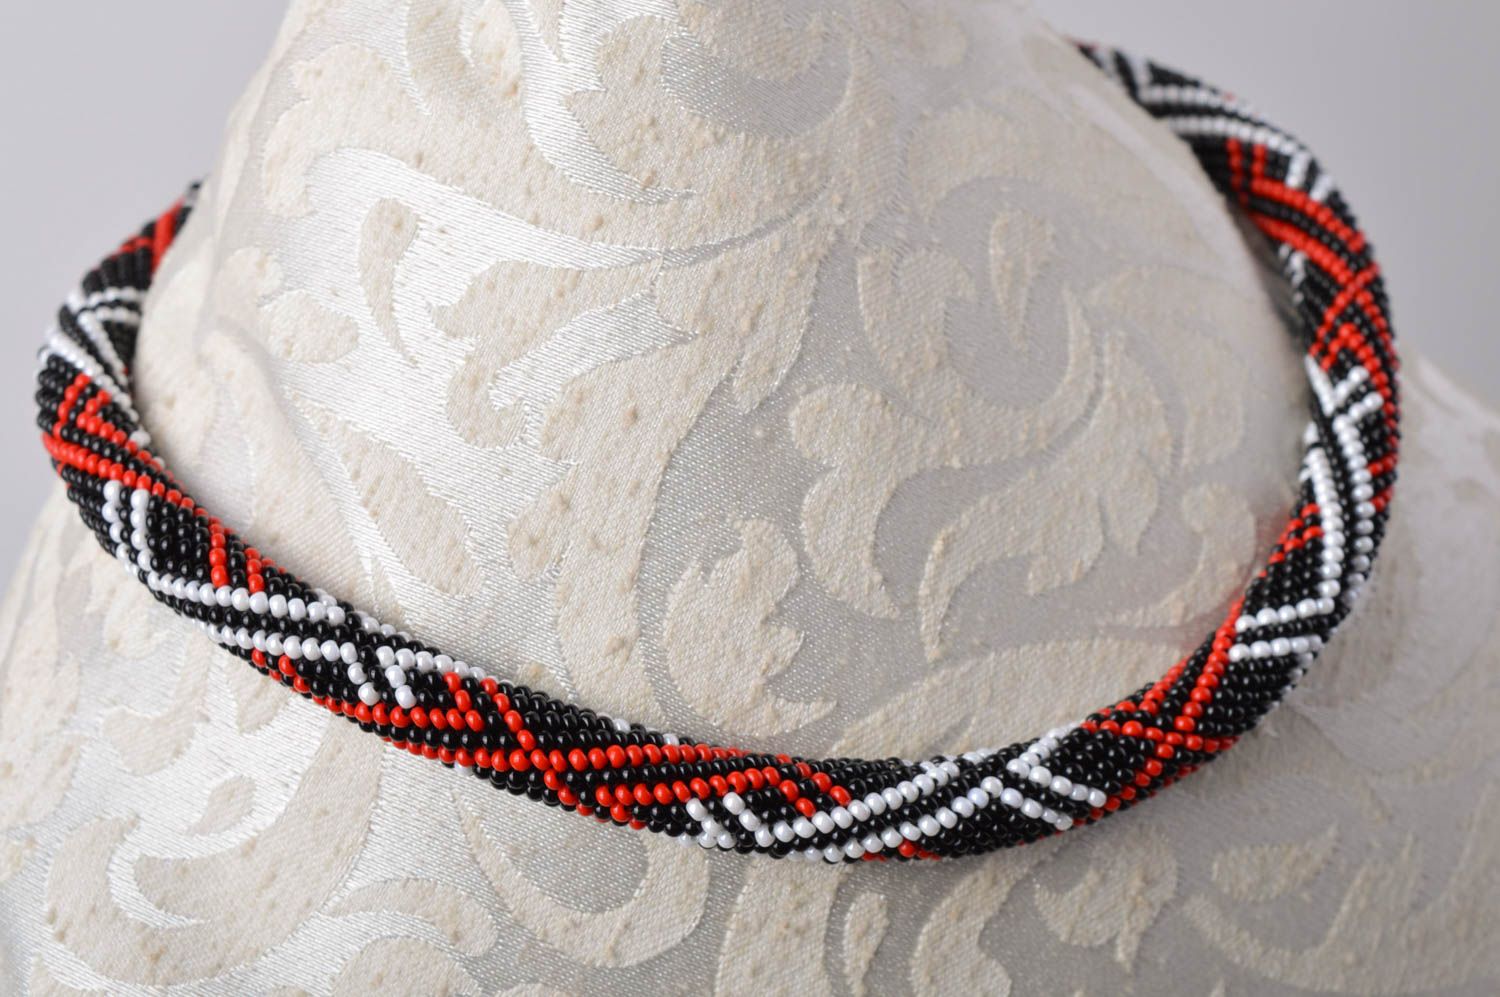 Handmade beaded cord necklace beautiful jewellery woven bead necklace designs photo 1